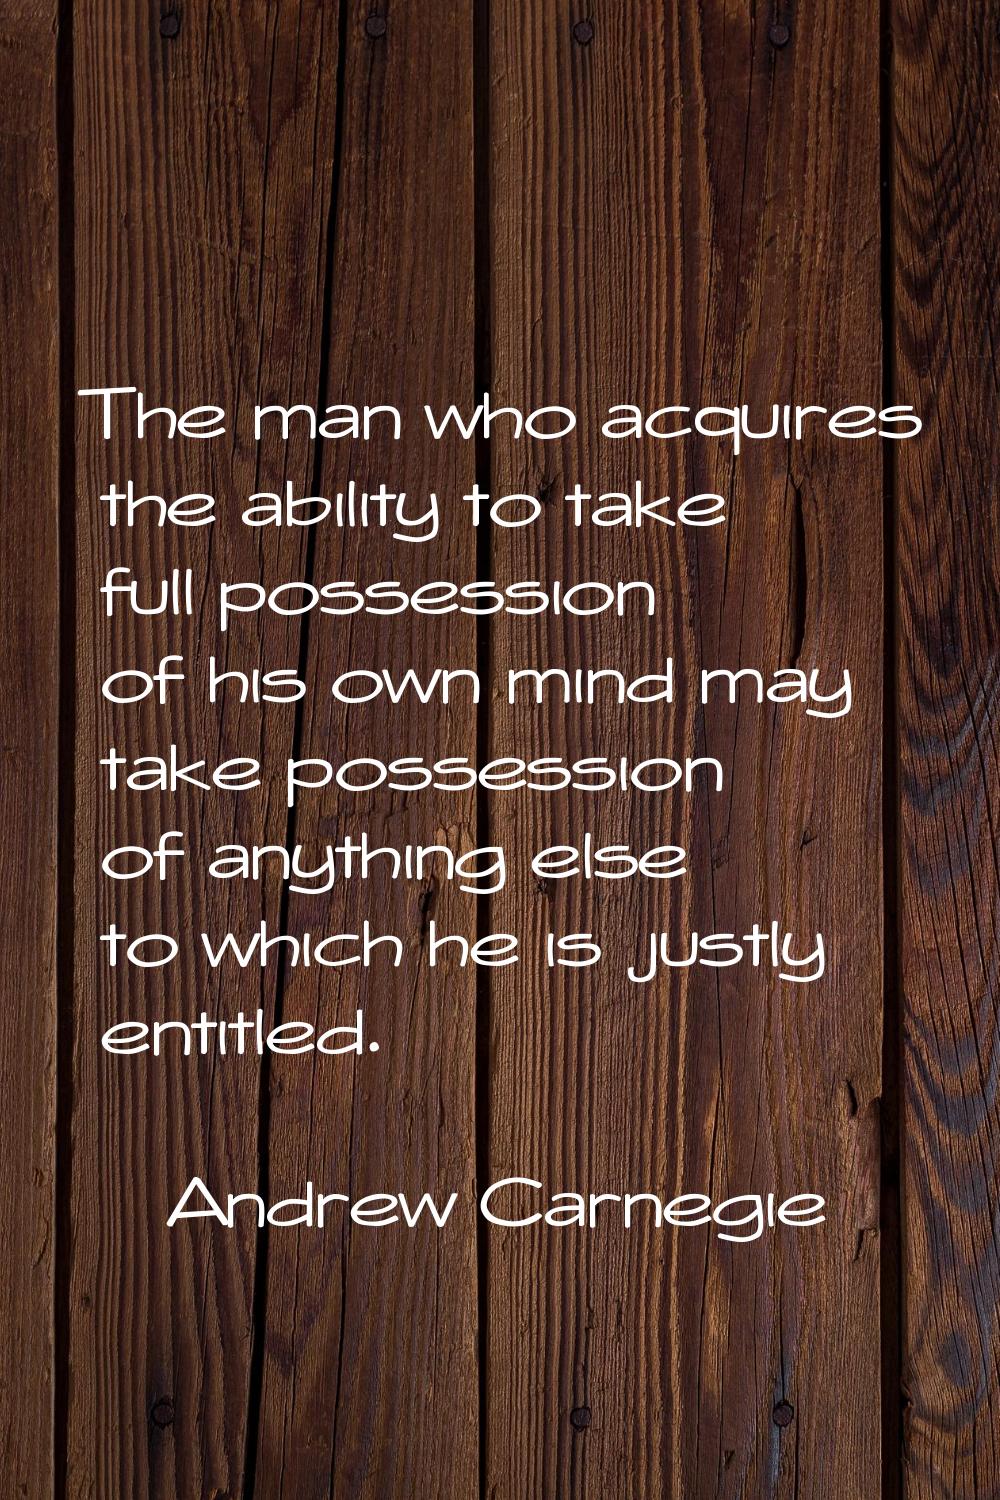 The man who acquires the ability to take full possession of his own mind may take possession of any